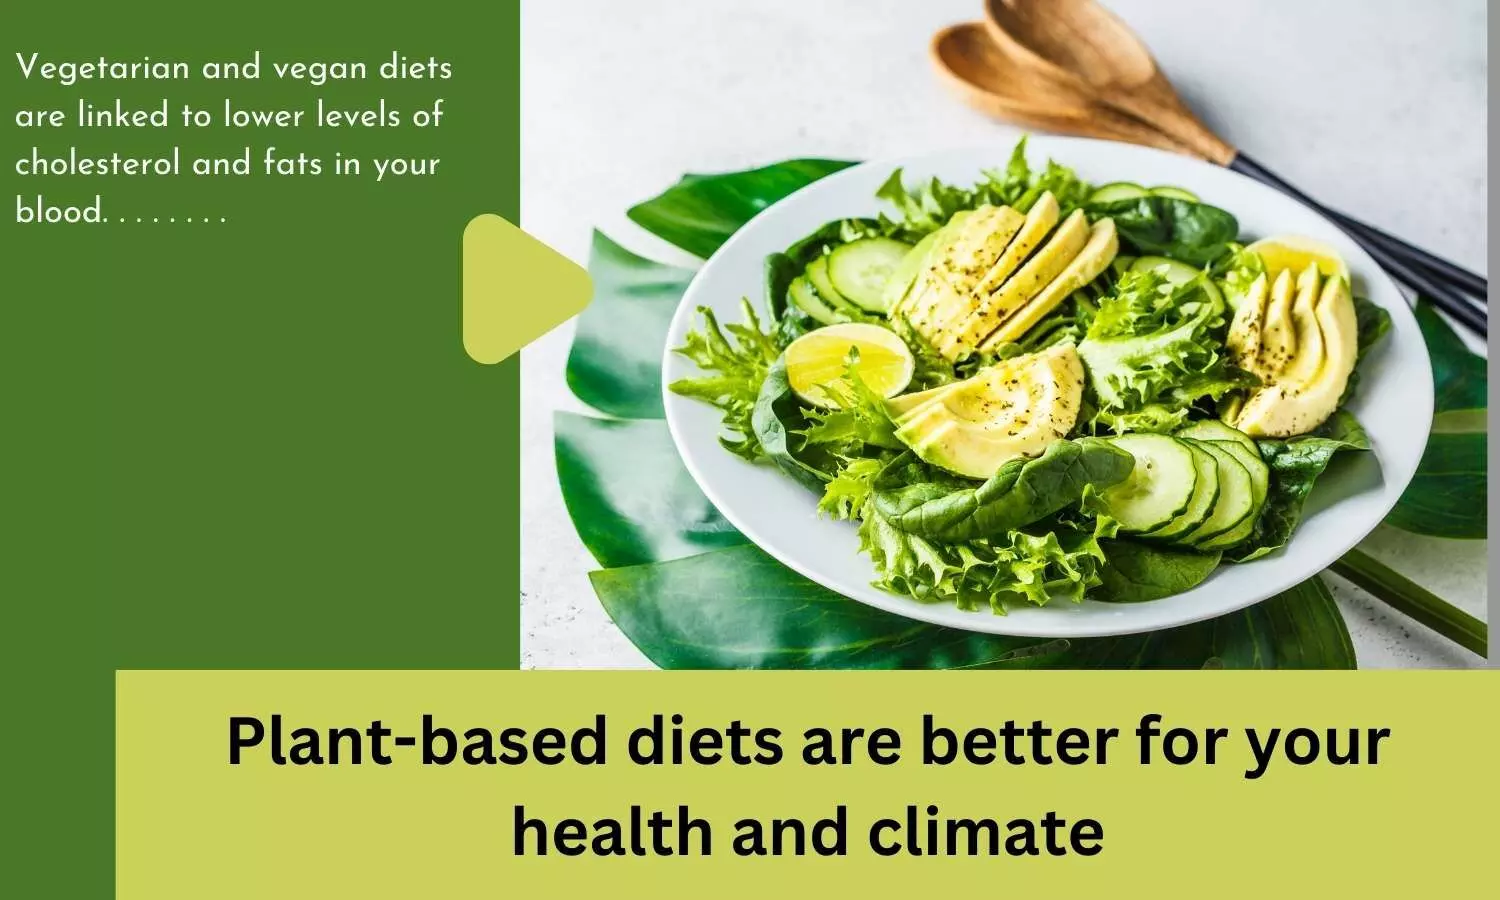 Plant-based diets are better for your health and climate